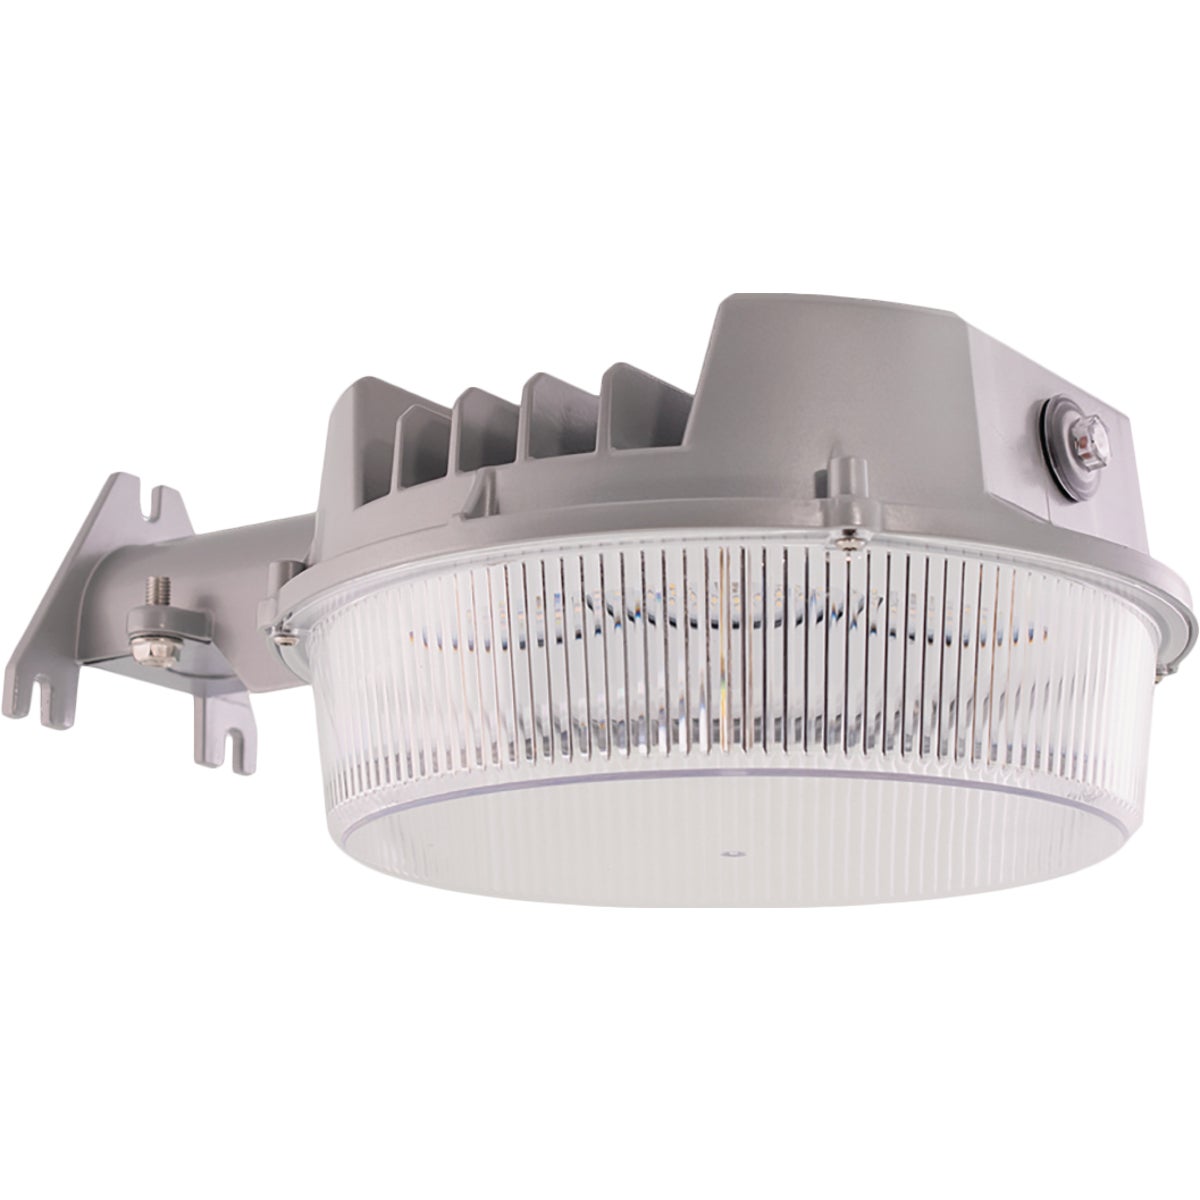 Halo Gray Dusk To Dawn LED Outdoor Area Light Fixture, 2000 Lm.